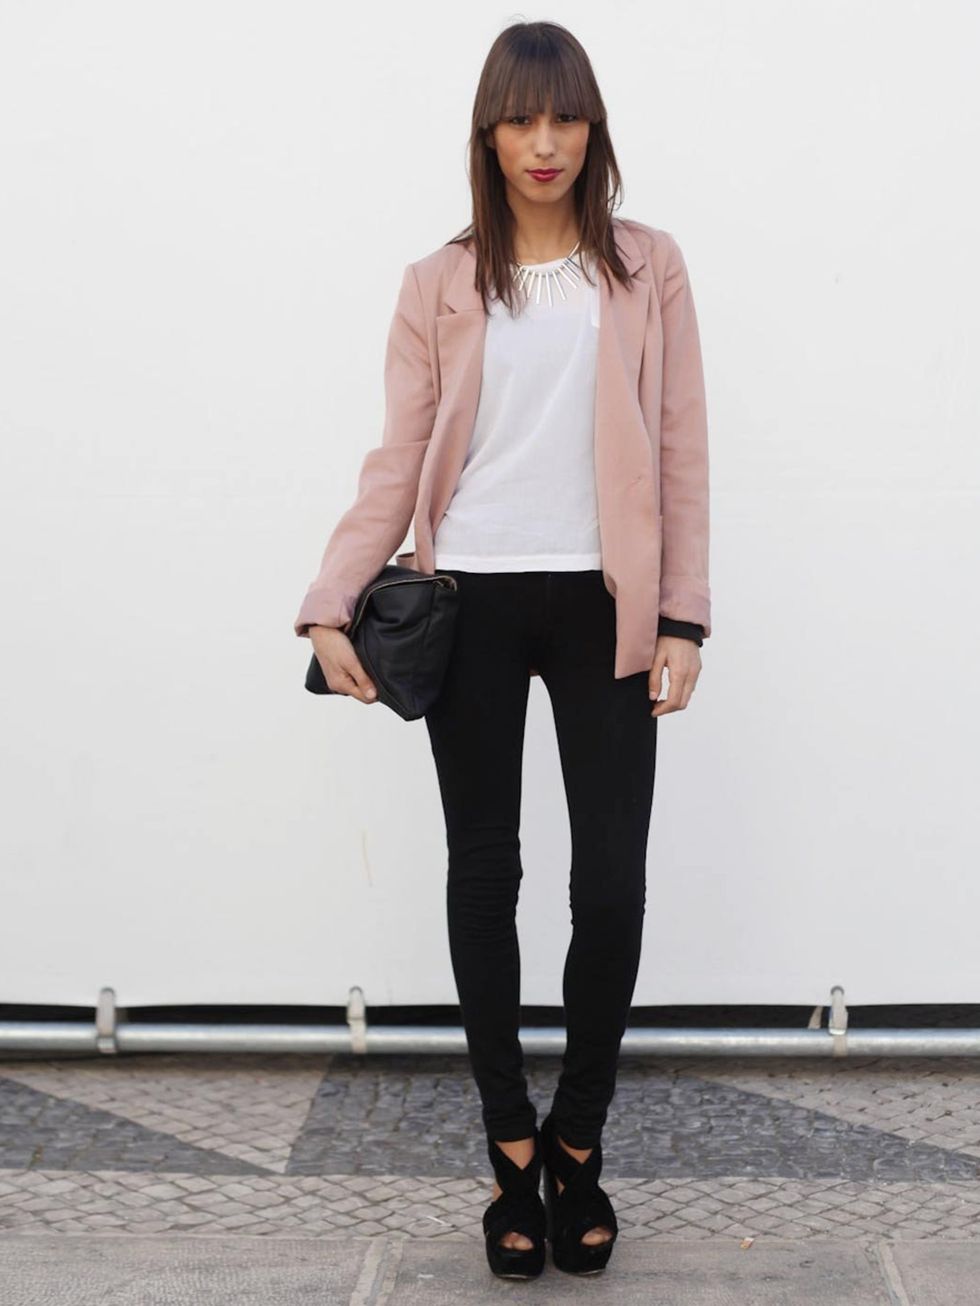 <p>Sofia, Student.Bershka jacket, H&amp;M top, vintage trousers and shoes.</p>